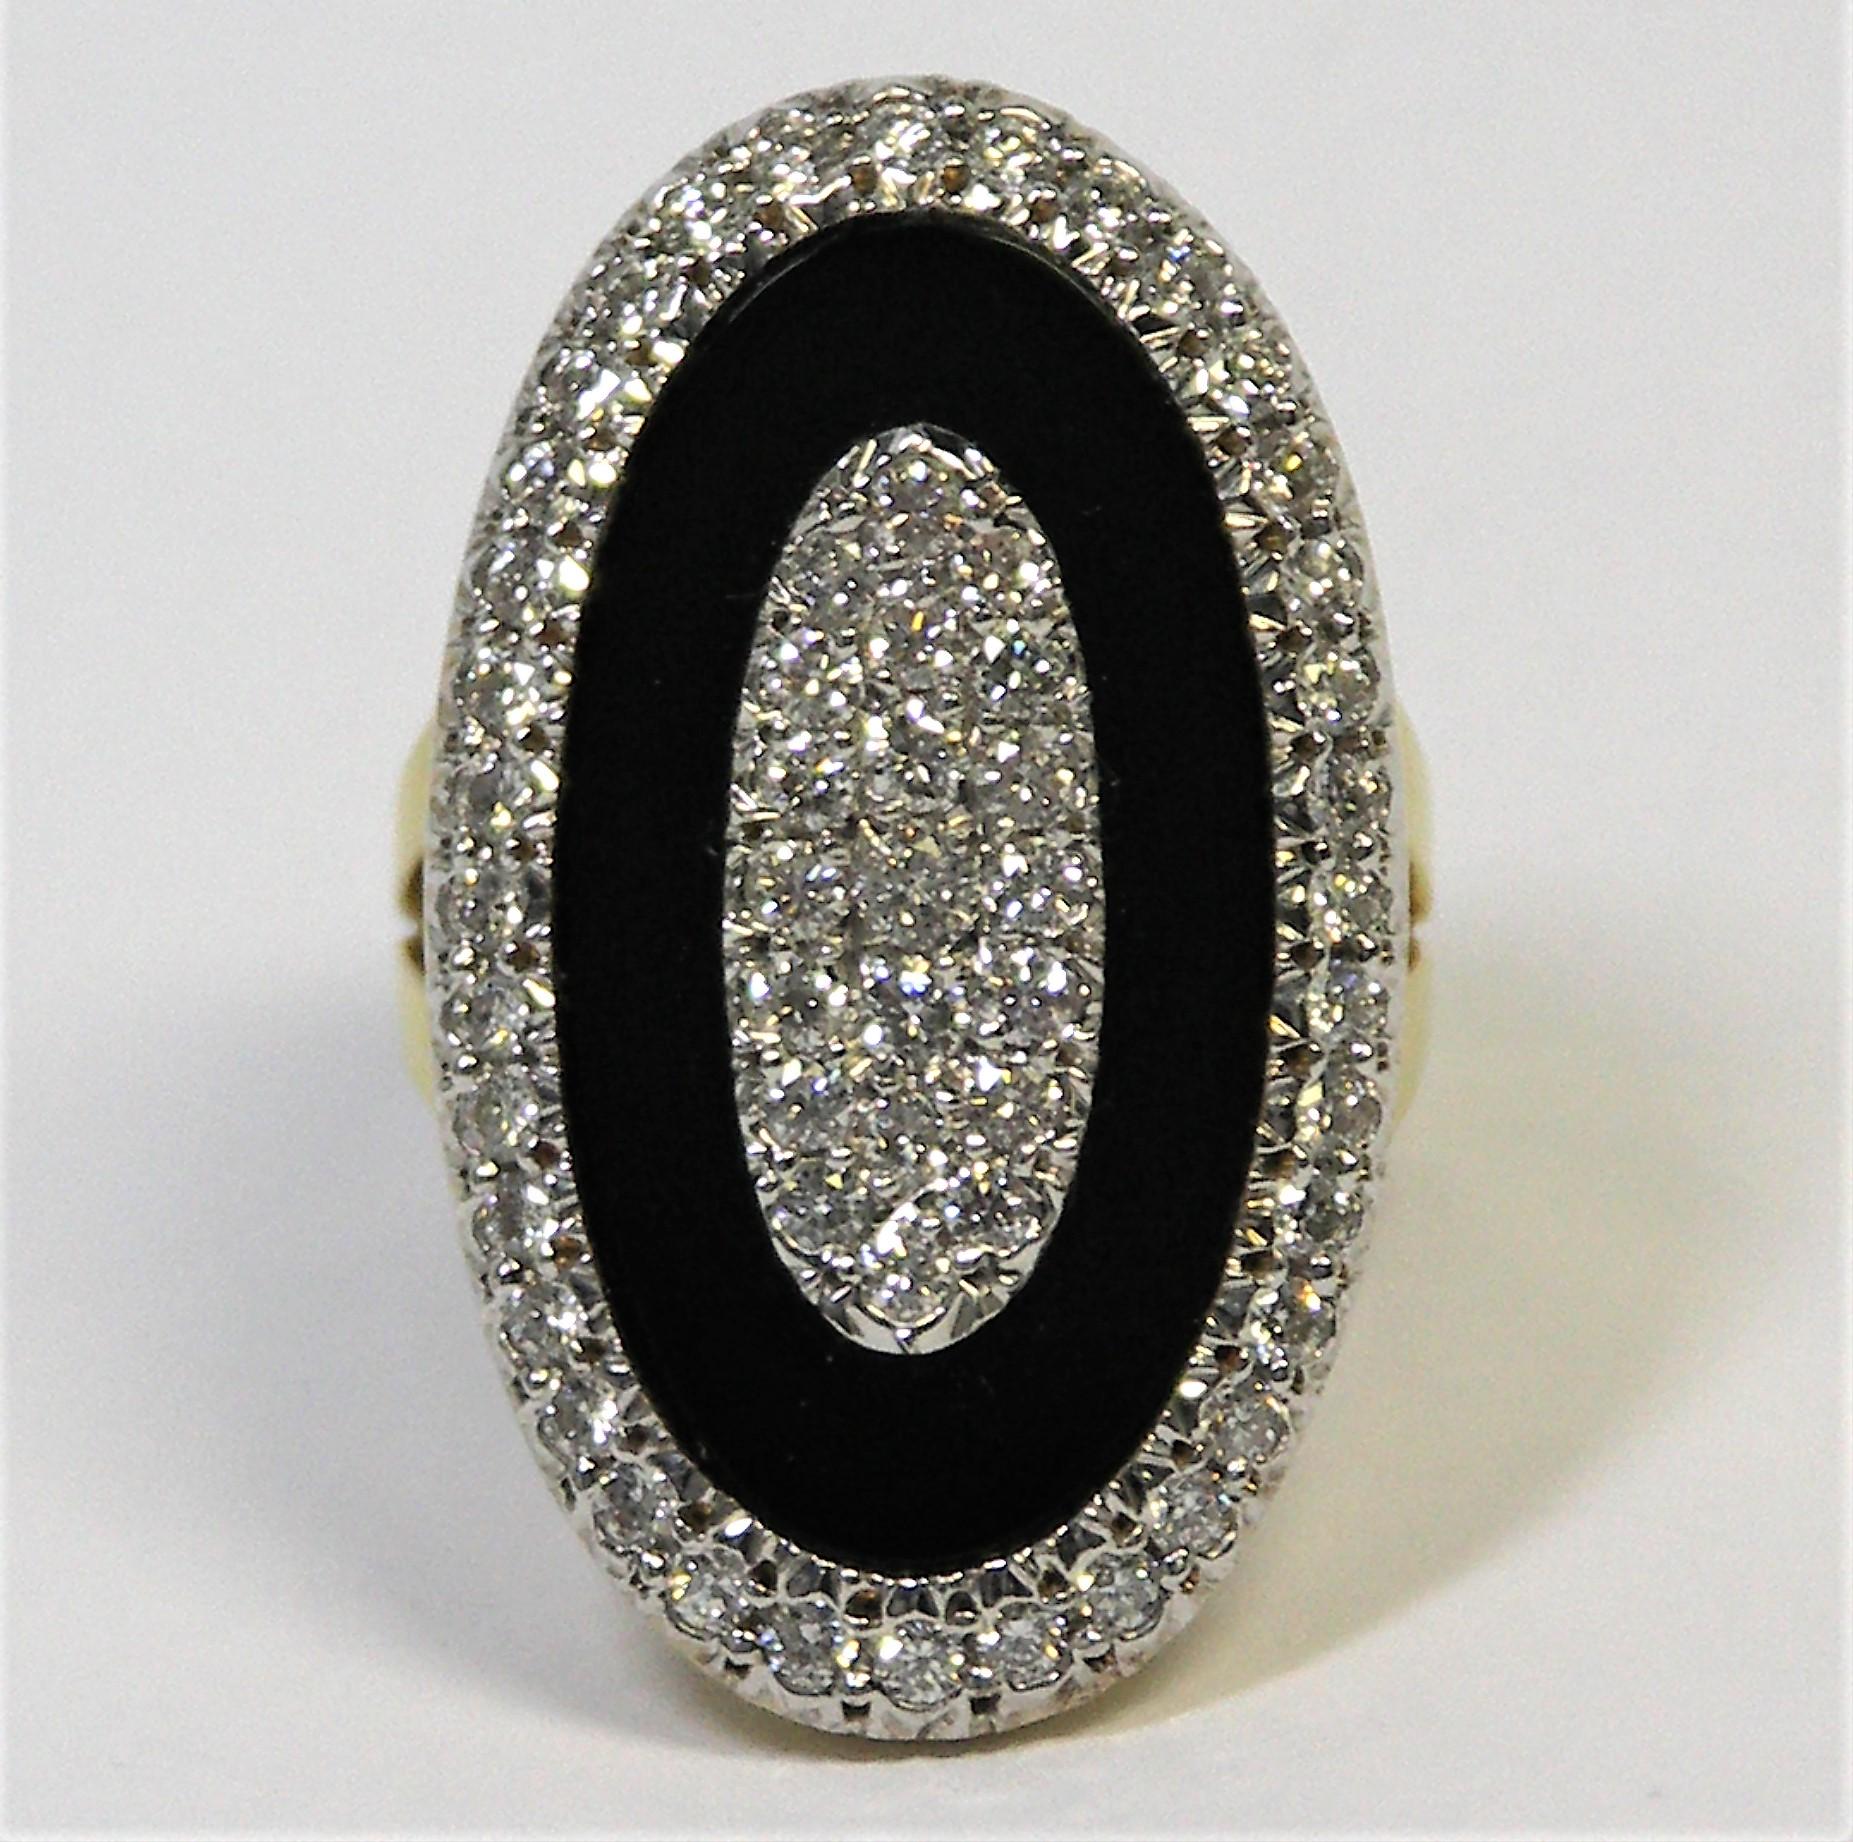 Made of 18K Yellow Gold with a large oval shaped, onyx slab cut into
the ring, surrounded by pave set diamonds weighing an approximate
total of 2.00CT of overall G Color and VS1 Clarity. Notice the detailed
design sides of the ring. Measures 1 1/4